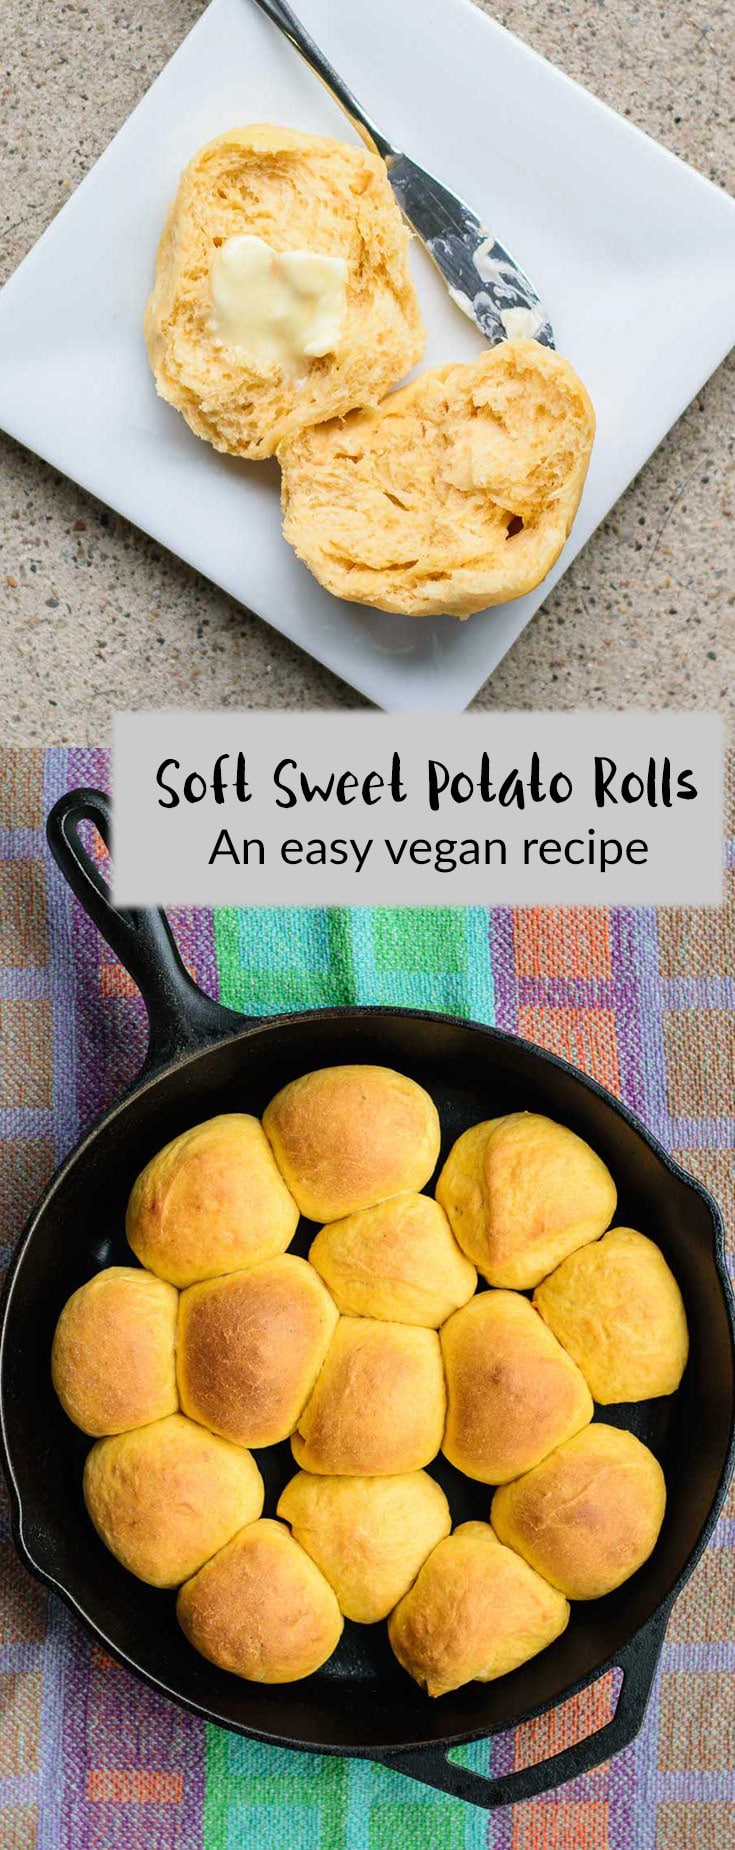 Sweet Potato Dinner Rolls | Beautifully orange-hued, soft and tender dinner rolls are made with mashed sweet potatoes and perfect accompaniment for any feast. These soft rolls are vegan easy to make, with just 3 minutes of kneading! | thecuriouschickpea.com #vegan #bread #baking #rolls